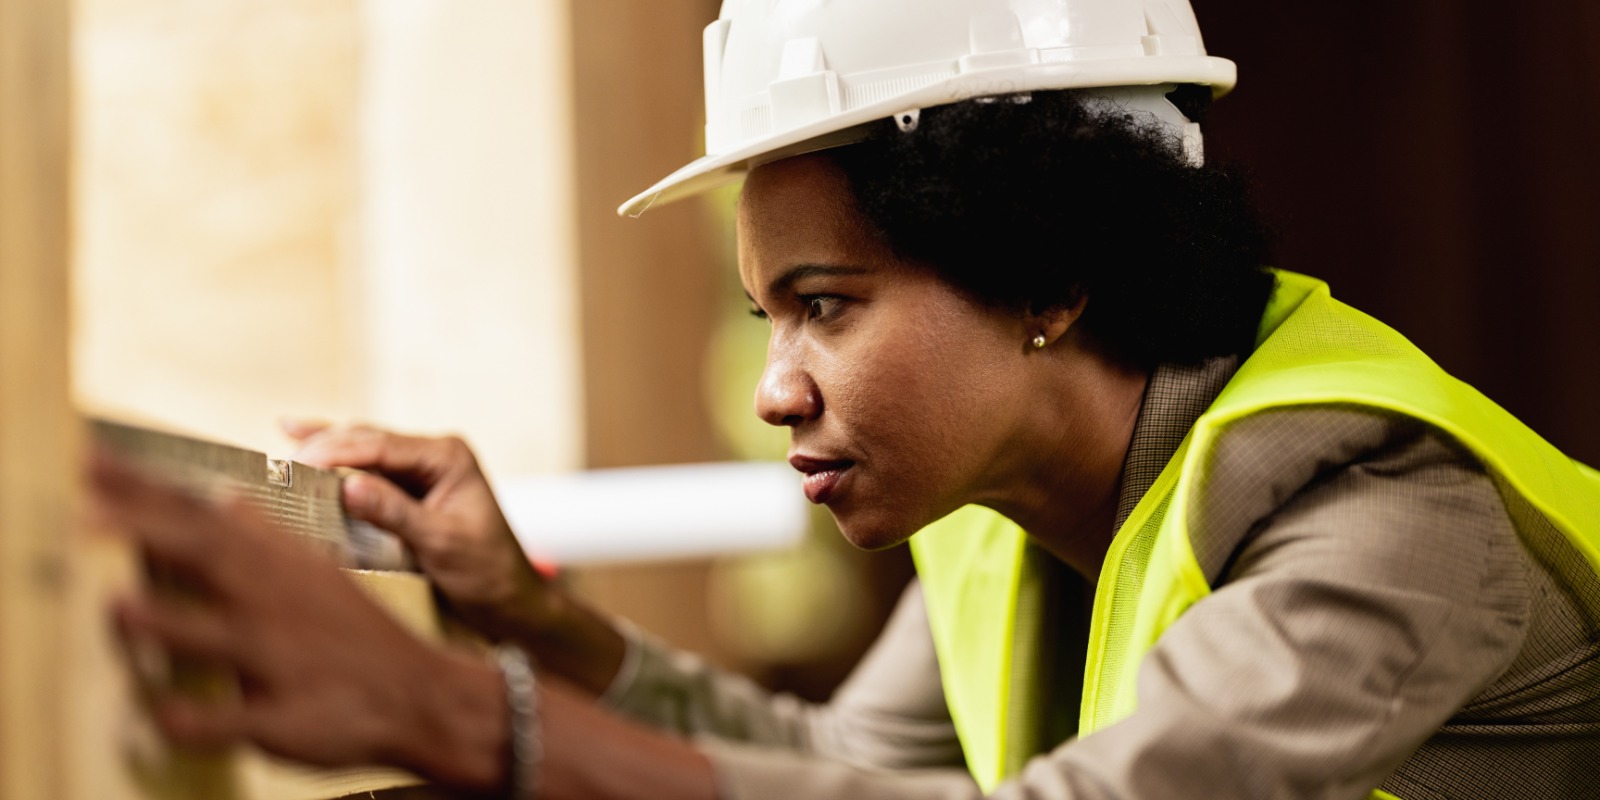 ADMI partners with Women in Real Estate Society to empower construction professionals with digital skills